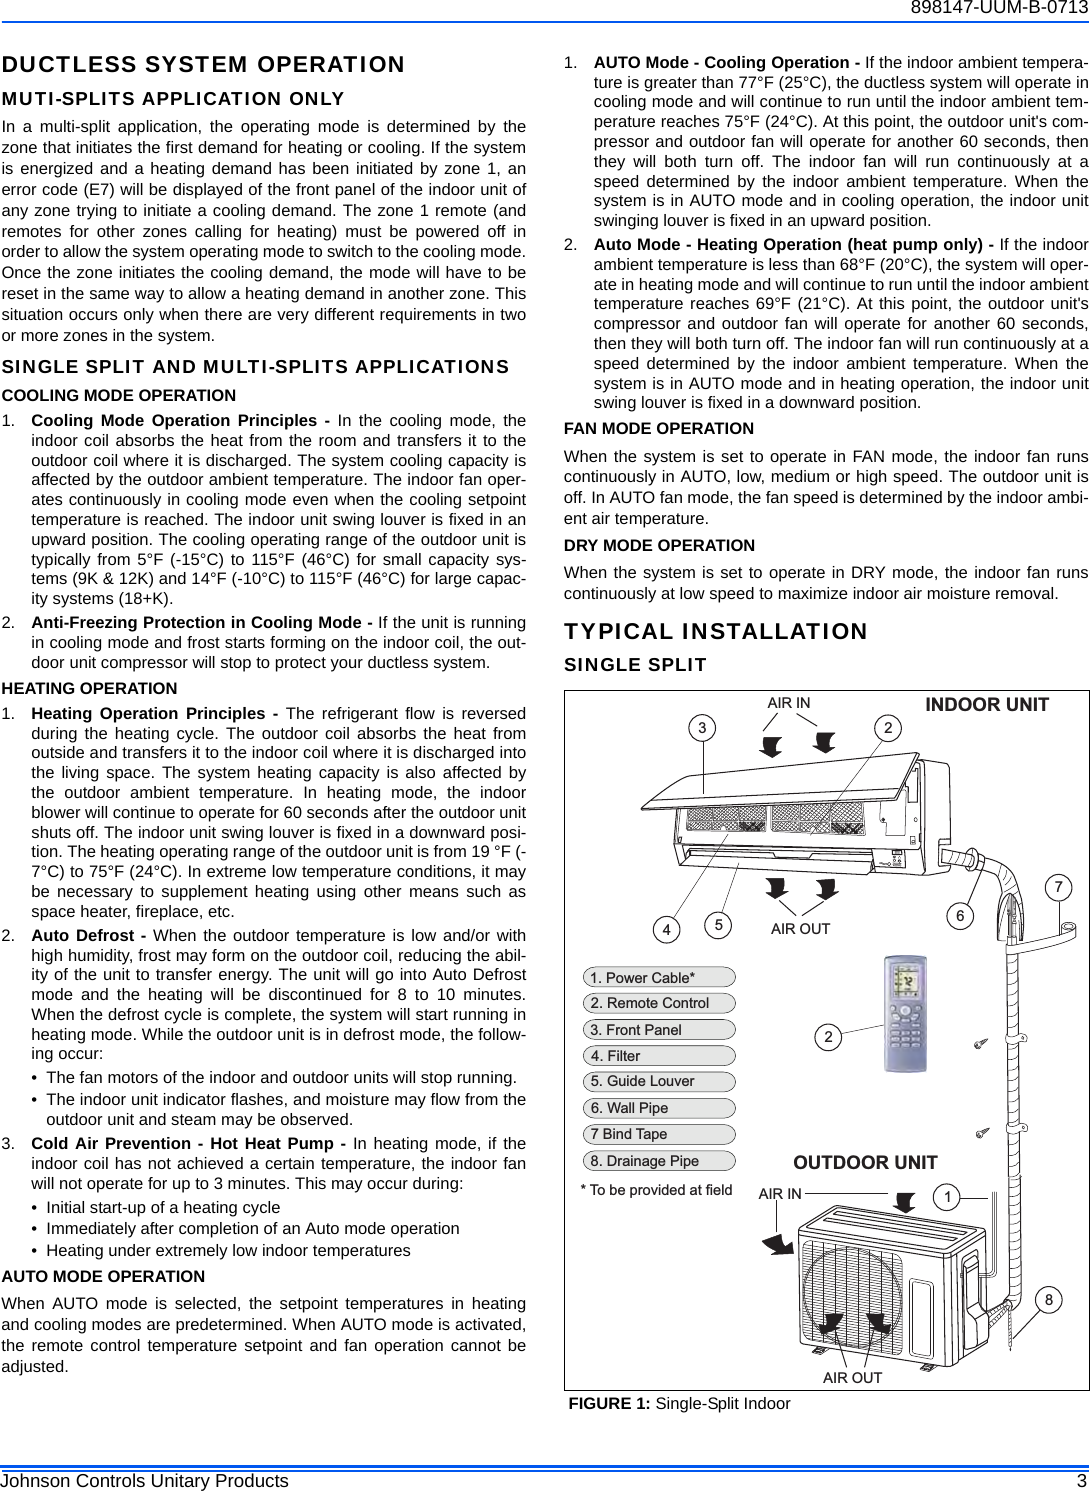 Page 3 of 10 - York Lx-Mini-Split-Air-Conditioners-Owner-S 898147-UUM-B-0713 User Manual York-lx-mini-split-air-conditioners-owner-s-manual